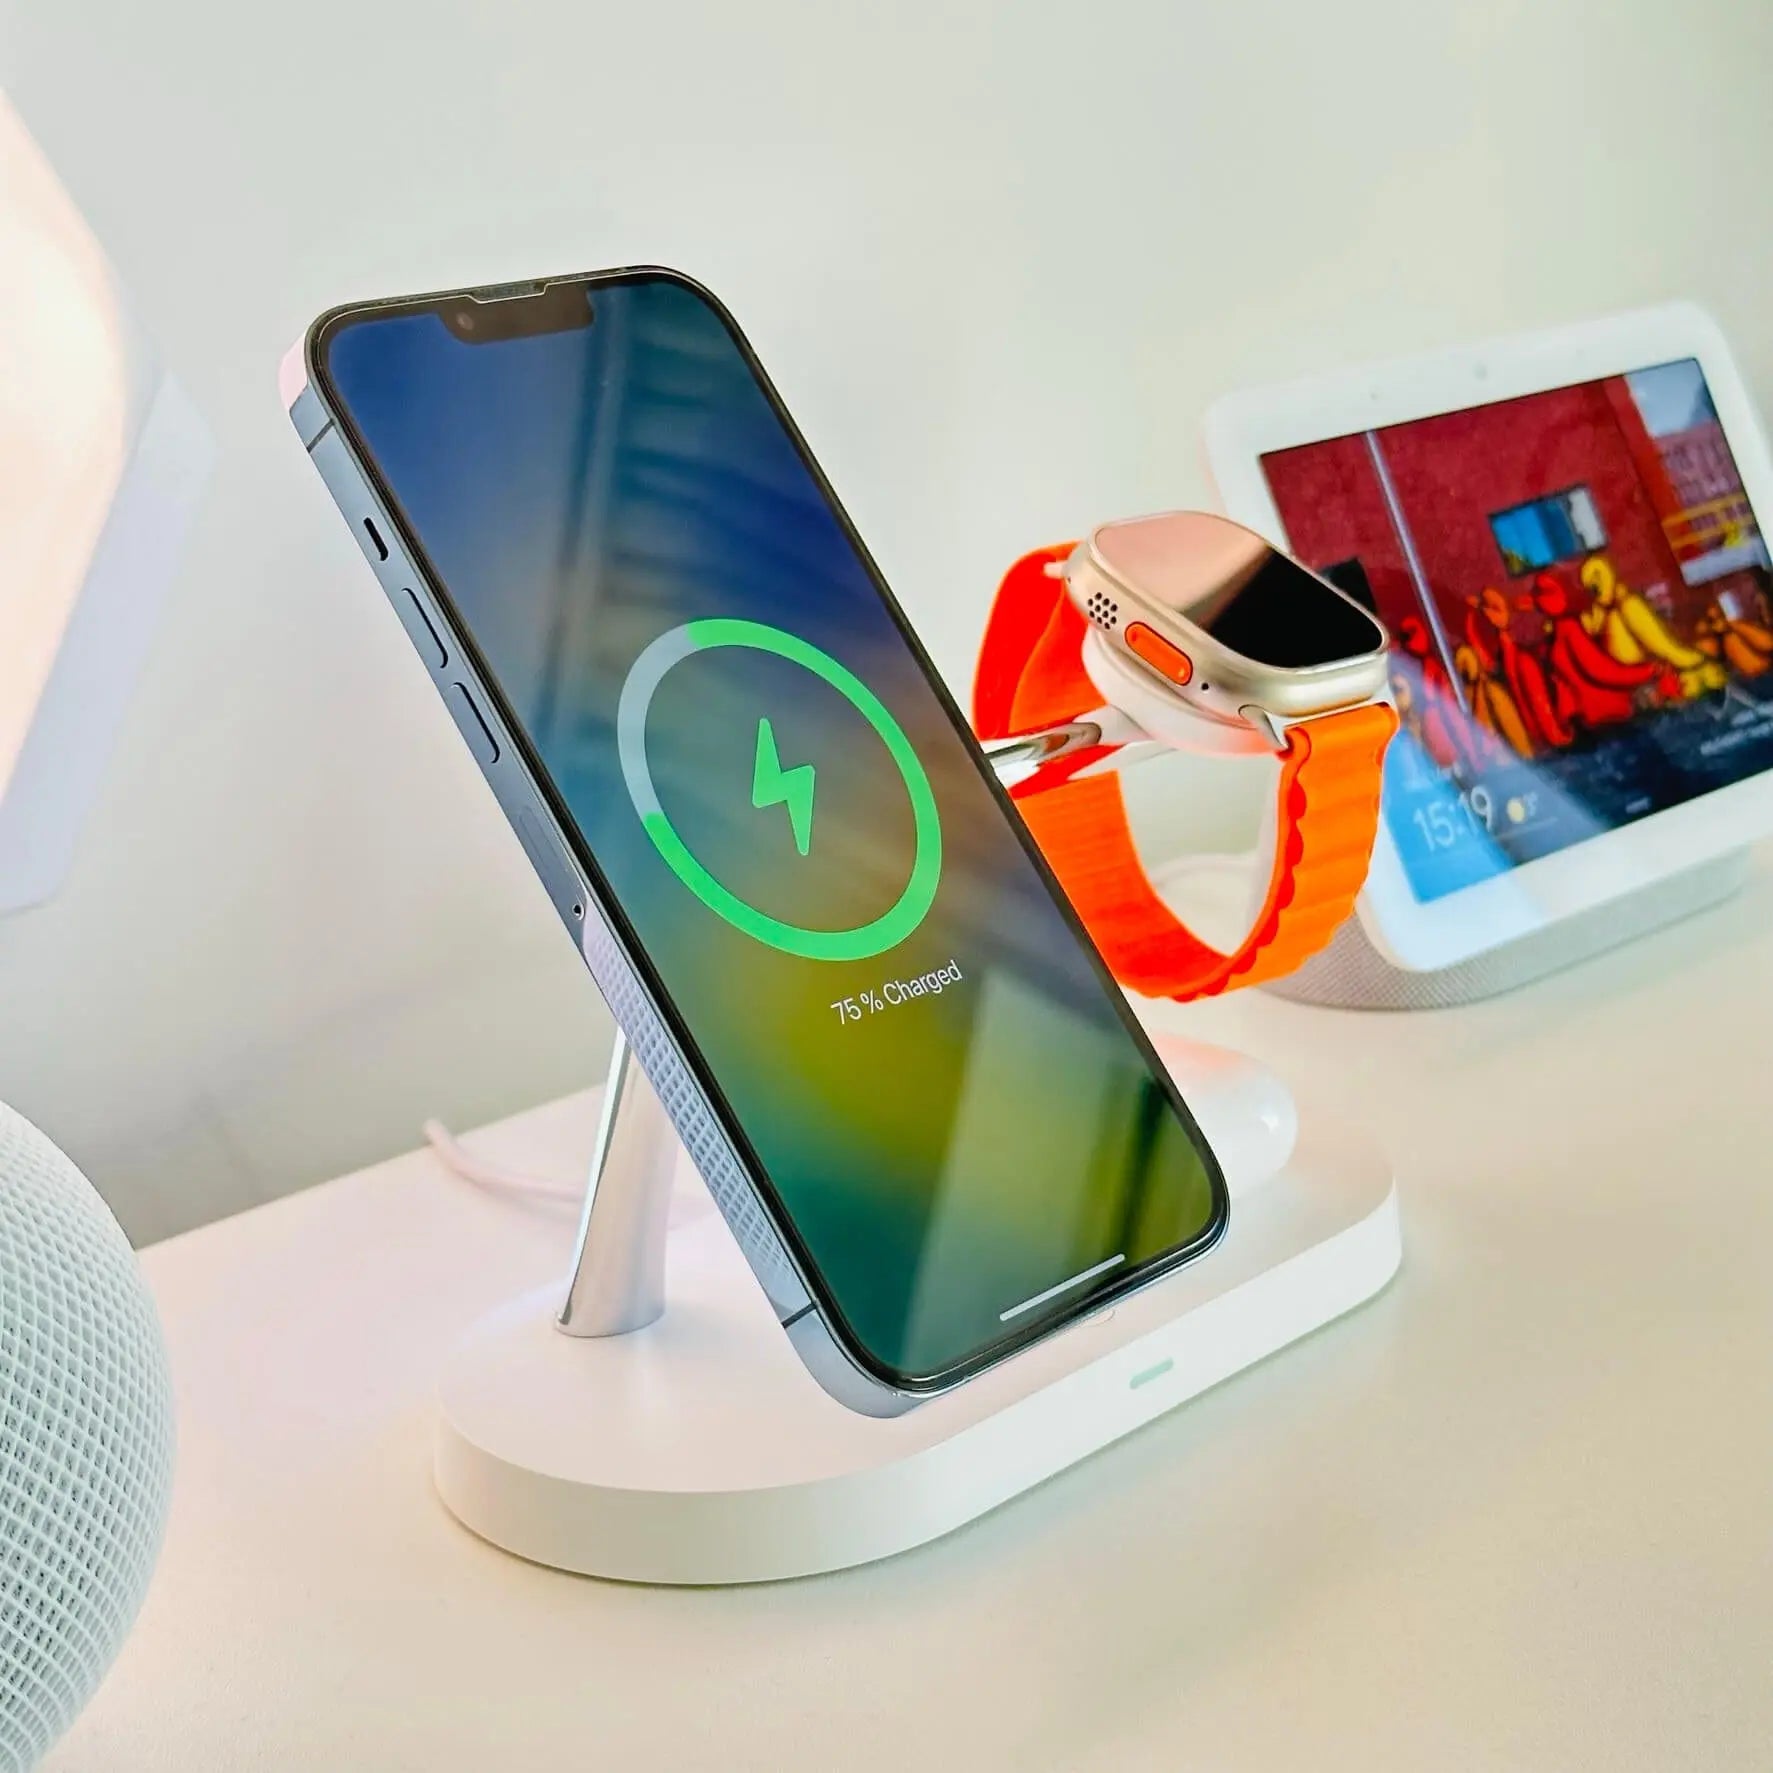 Myths & Useful Tips About Wireless Charging